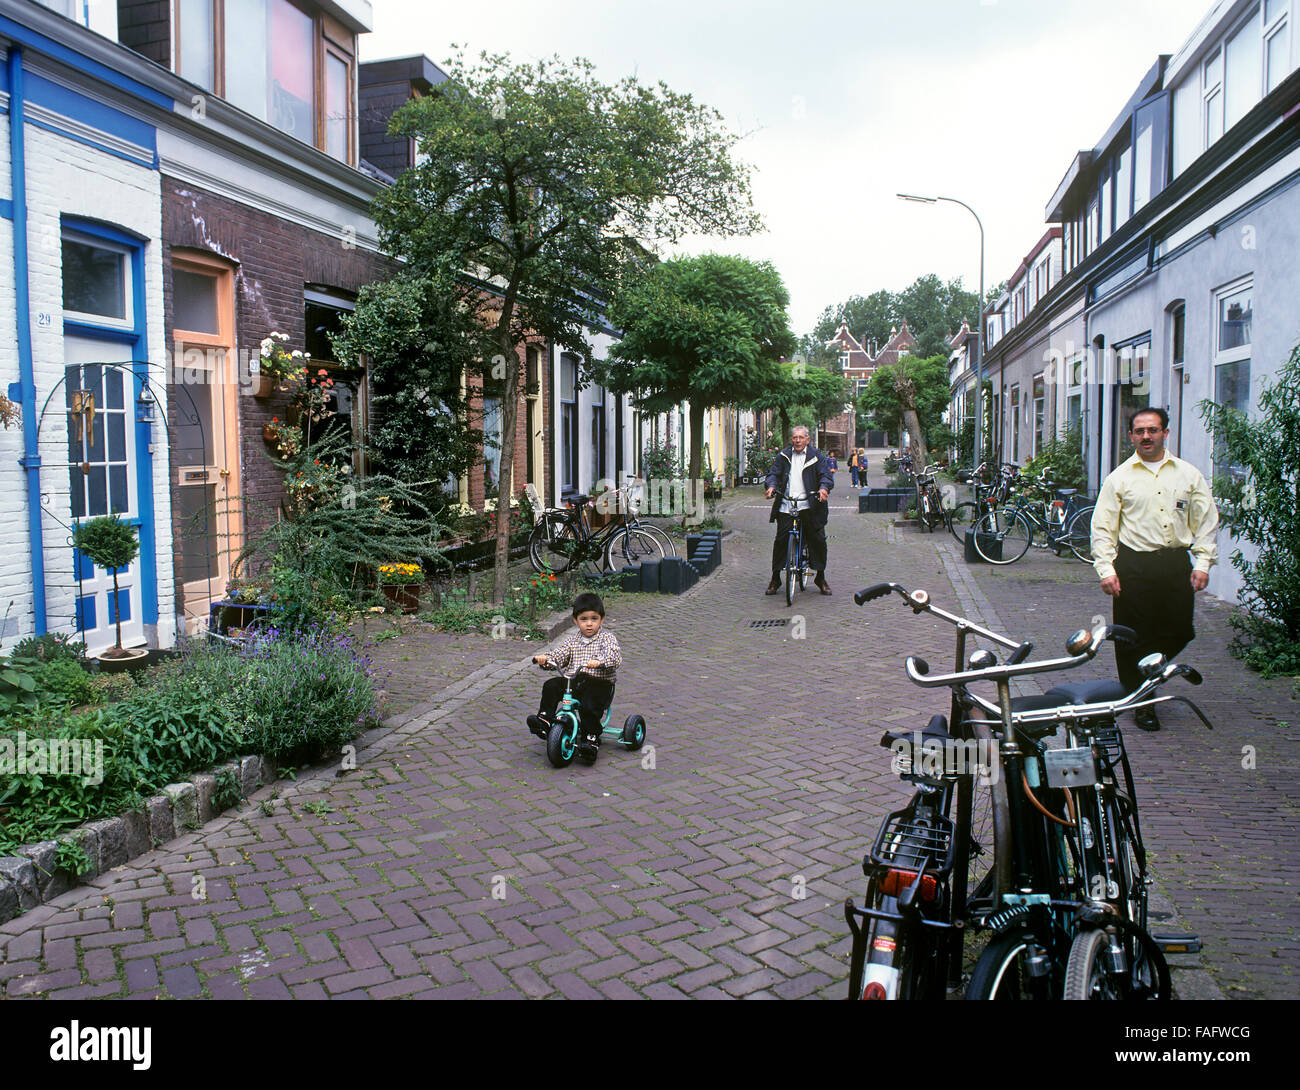 cycles-and-cyclists-in-anthonie-camerlingstraat-an-older-traffic-free-FAFWCG.jpg